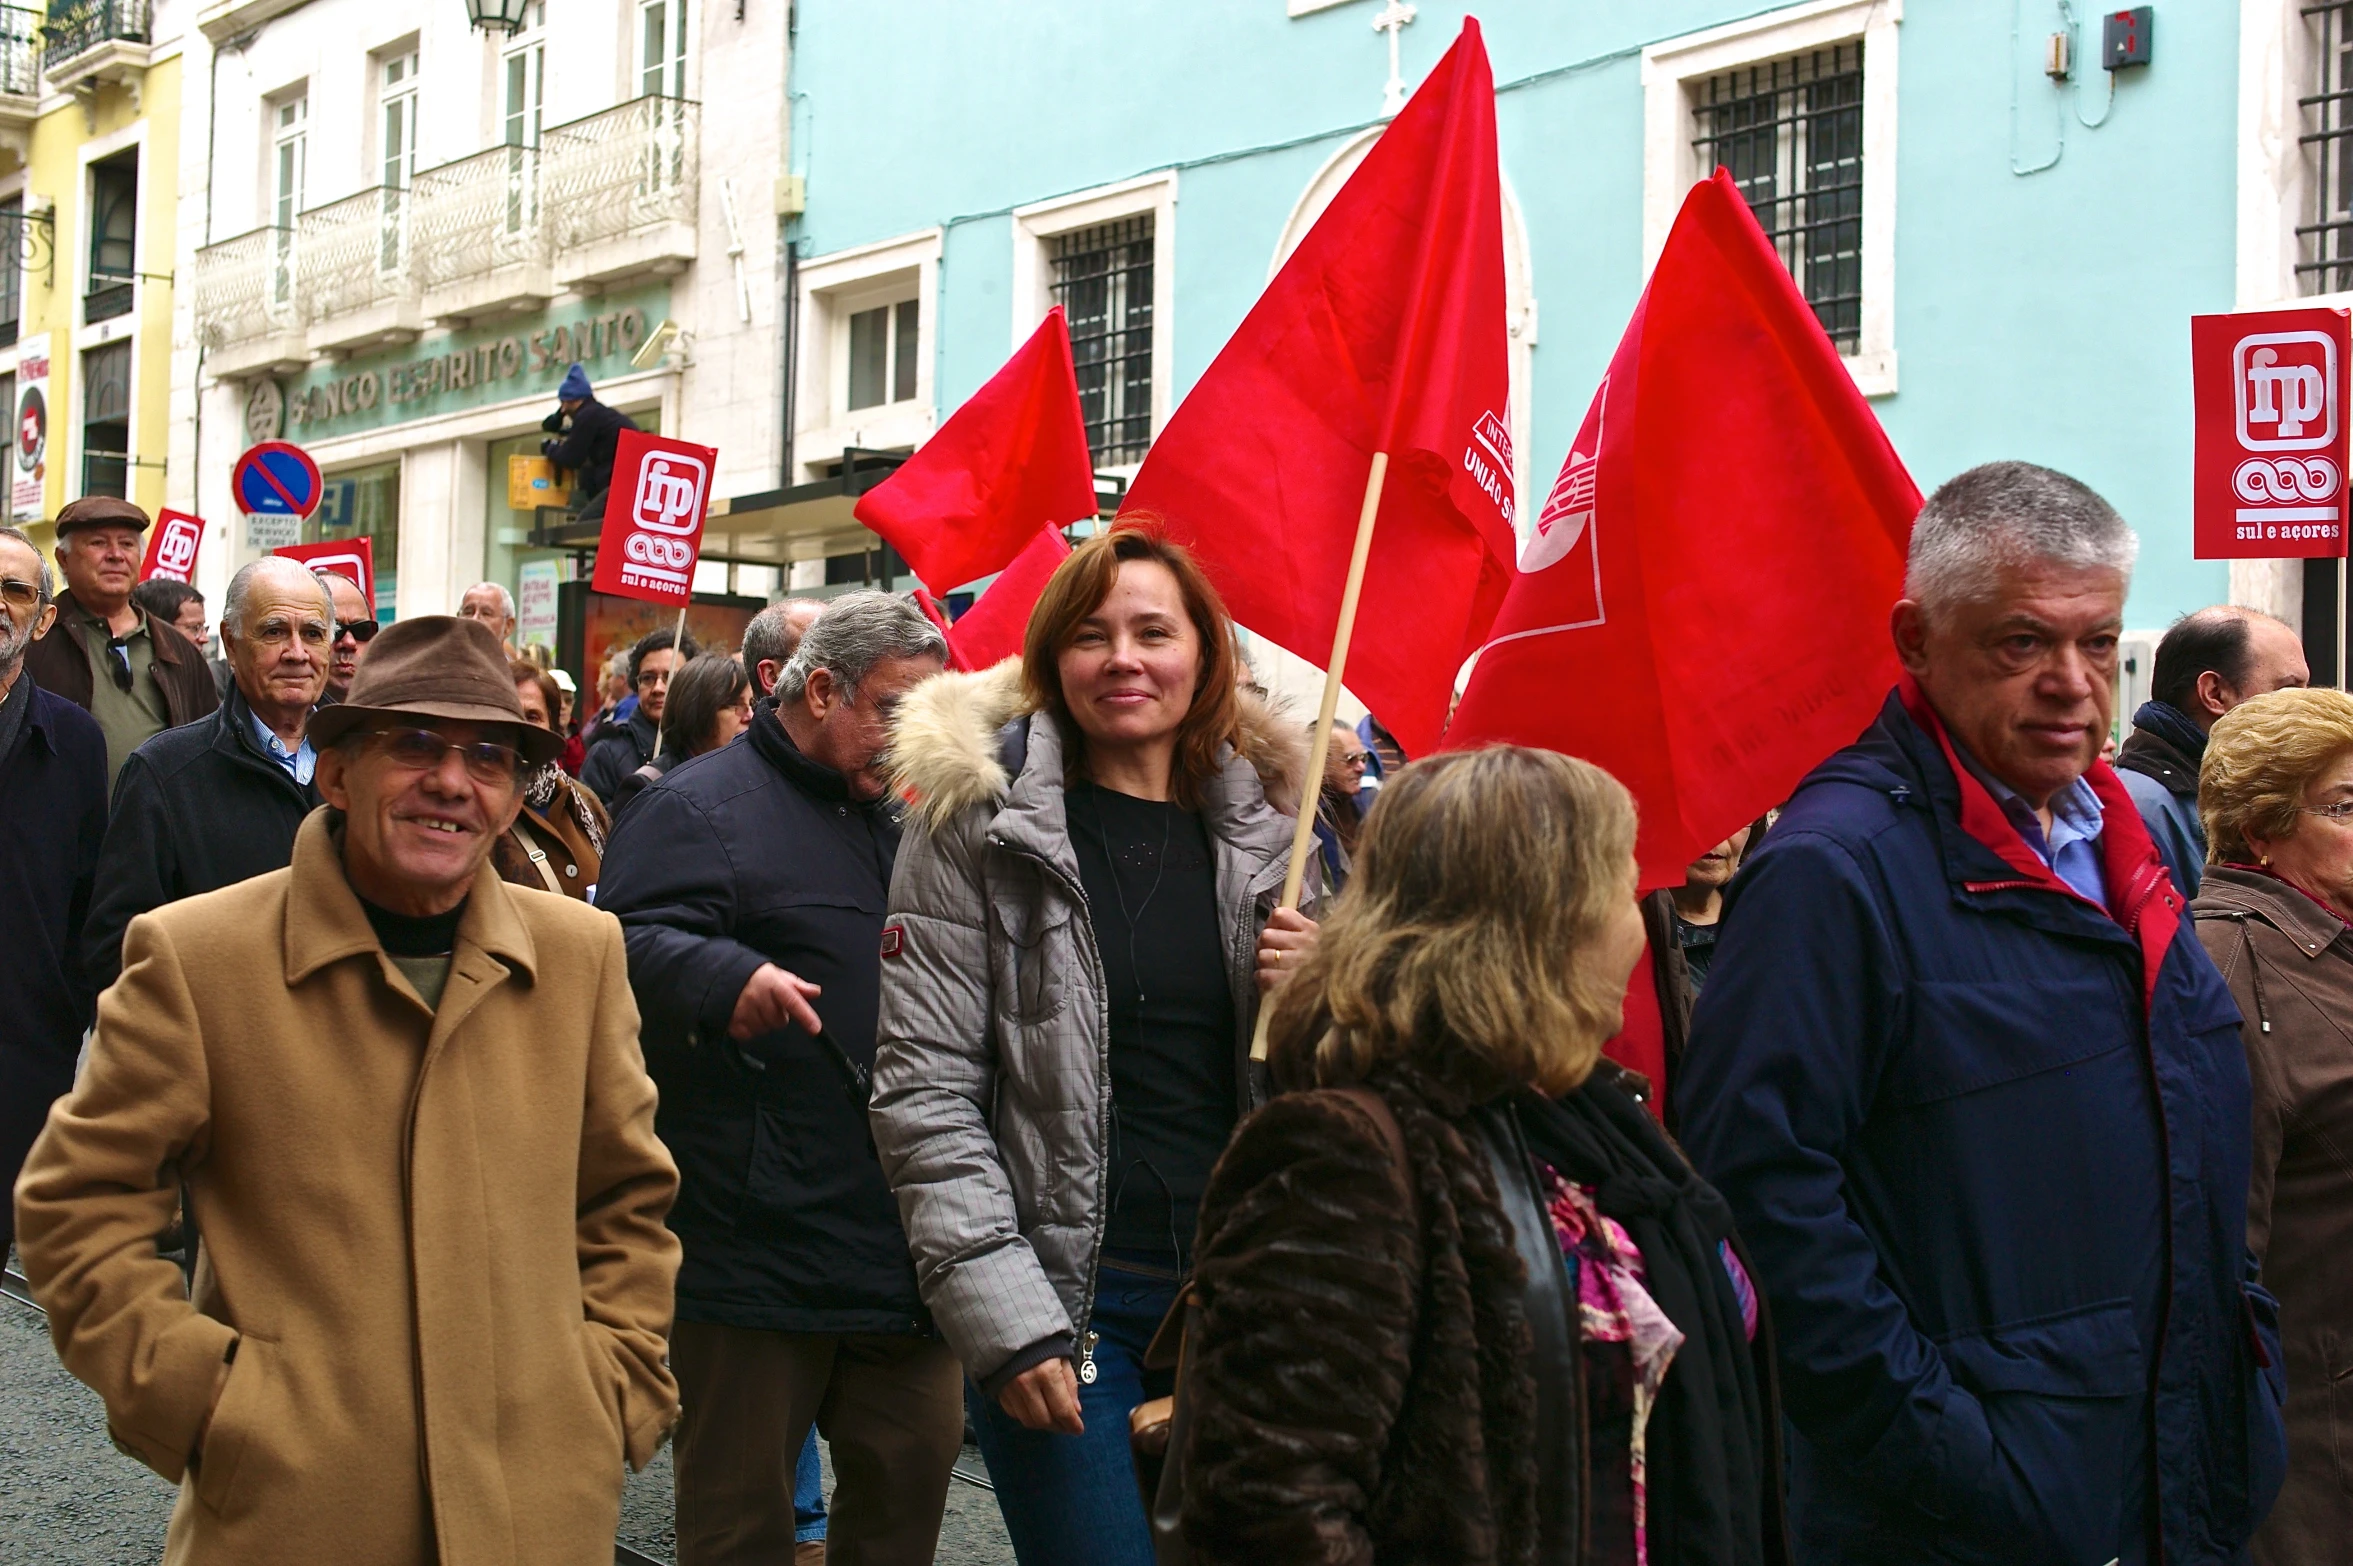 a large group of people standing next to each other holding red flags